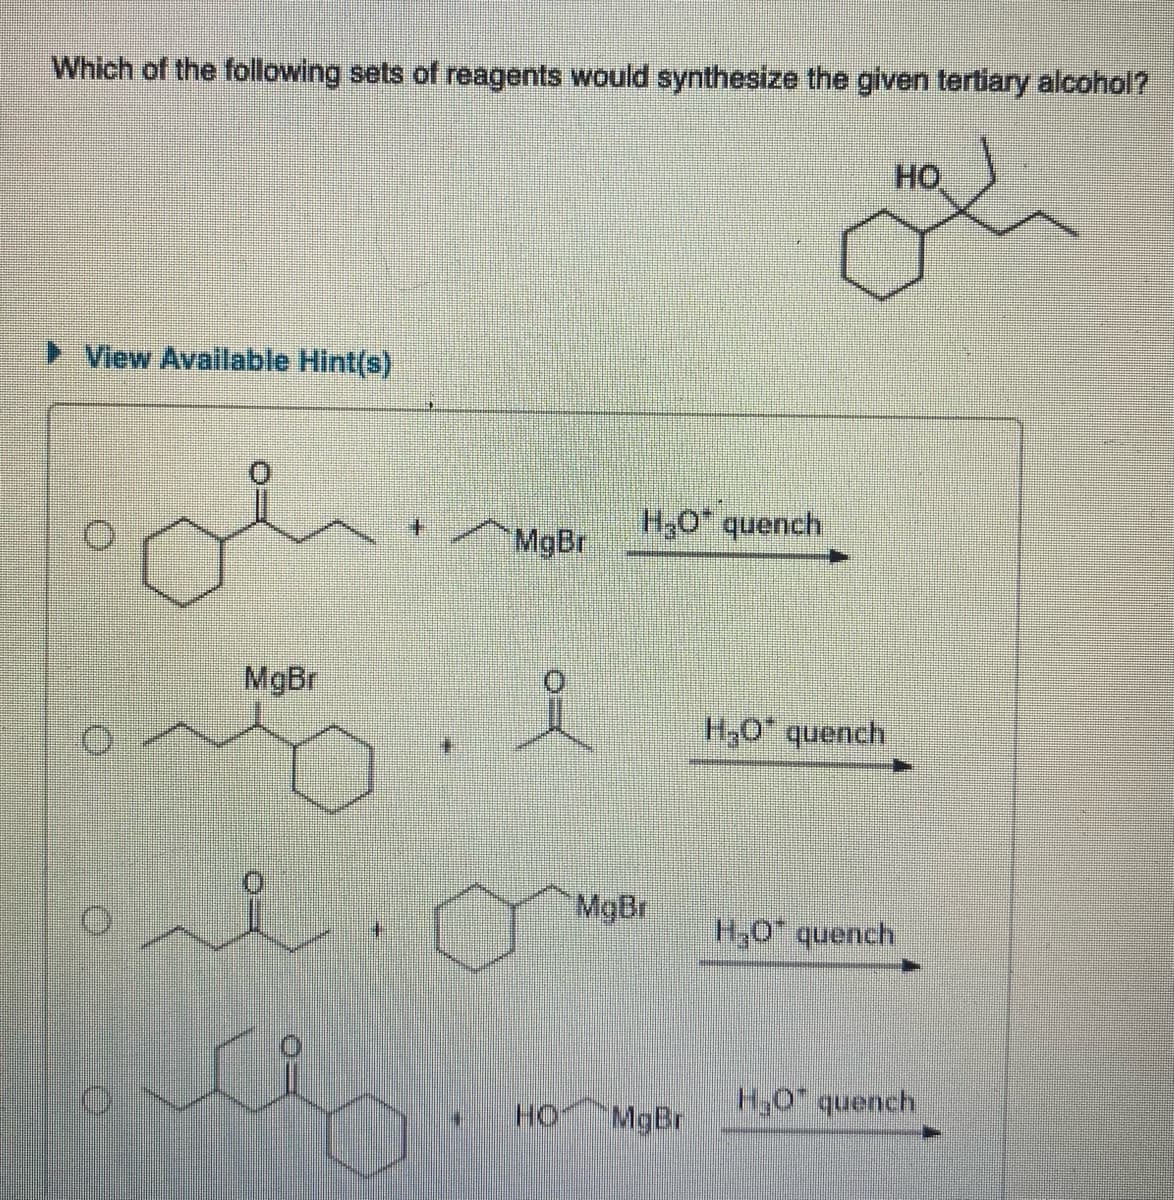 Which of the following sets of reagents would synthesize the given tertiary alcohol?
► View Available Hint(s)
ol
MgBr
MgBr
요
H₂O* quench
MgBr
HO MgBr
H₂O* quench
HO
H₂O quench
H₂O quench